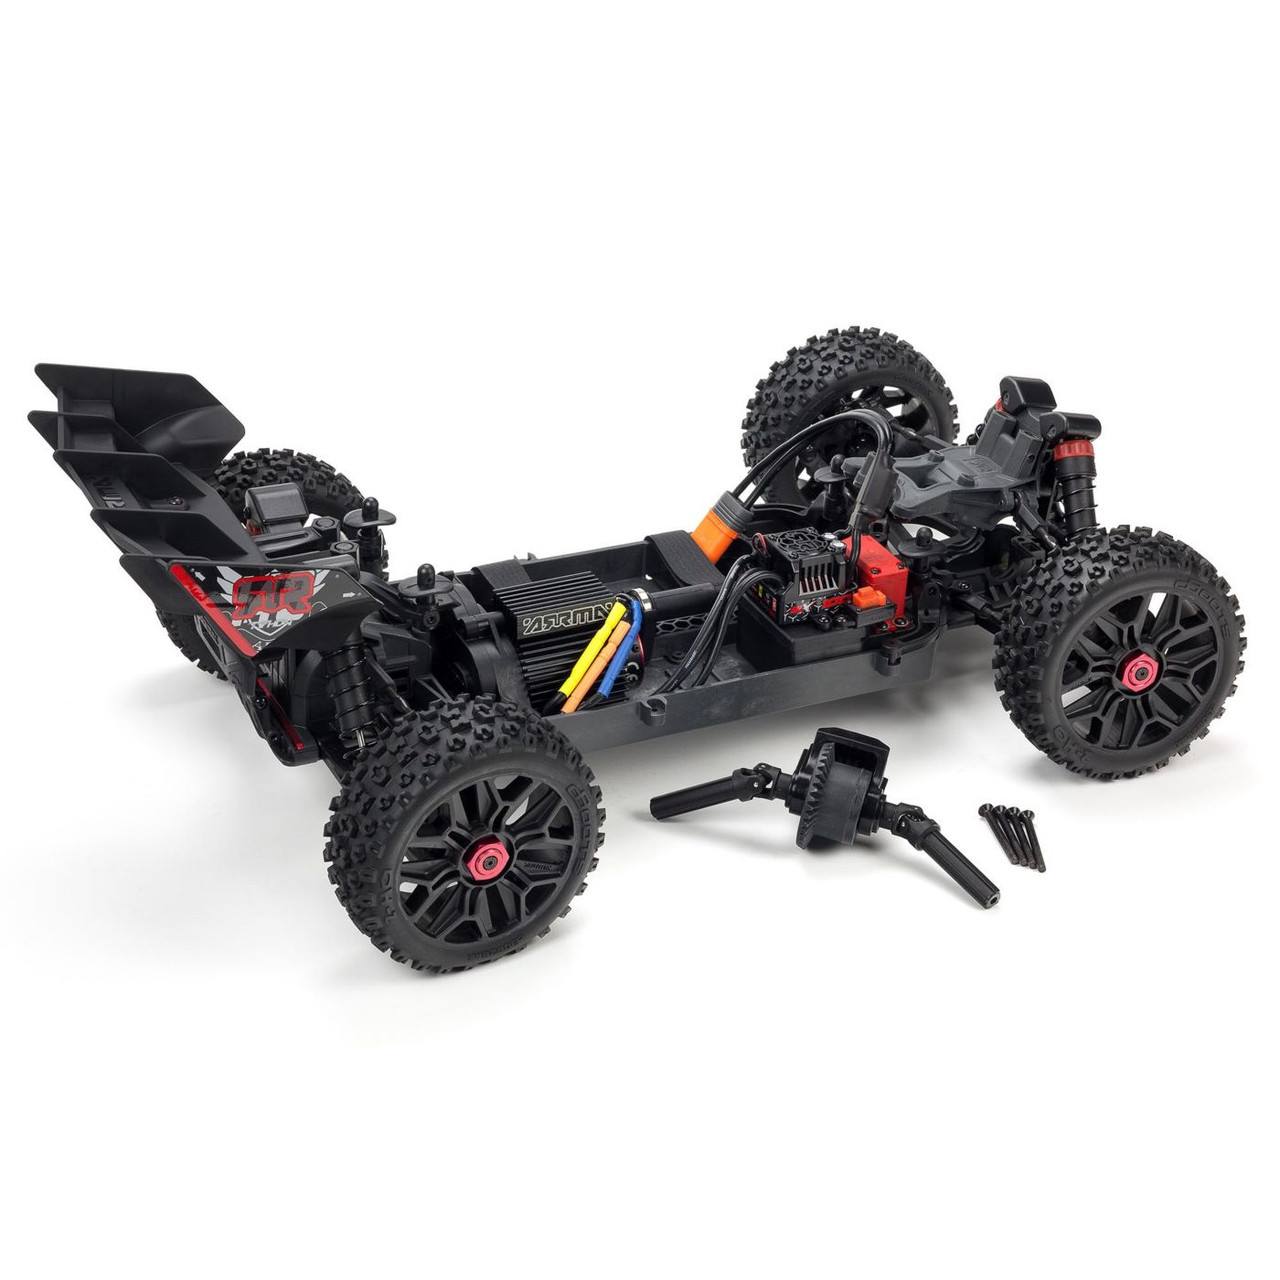 ARRMA 1/8 TYPHON 3S BLX AR102722 Brushless 4WD Speed Buggy RTR w 